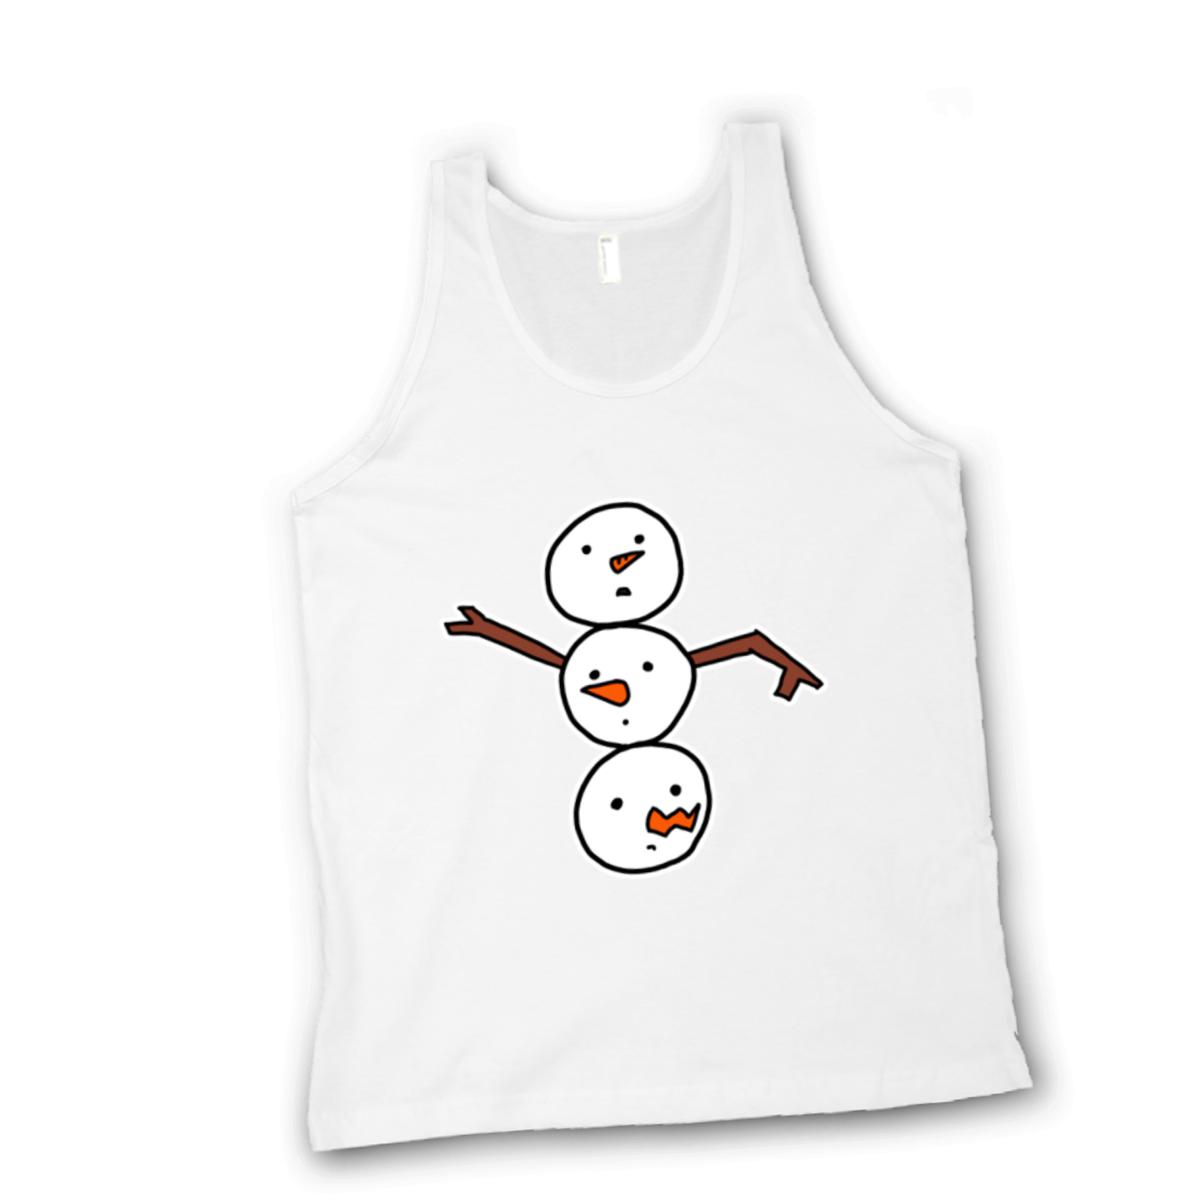 Snowman All Heads Unisex Tank Top Large white